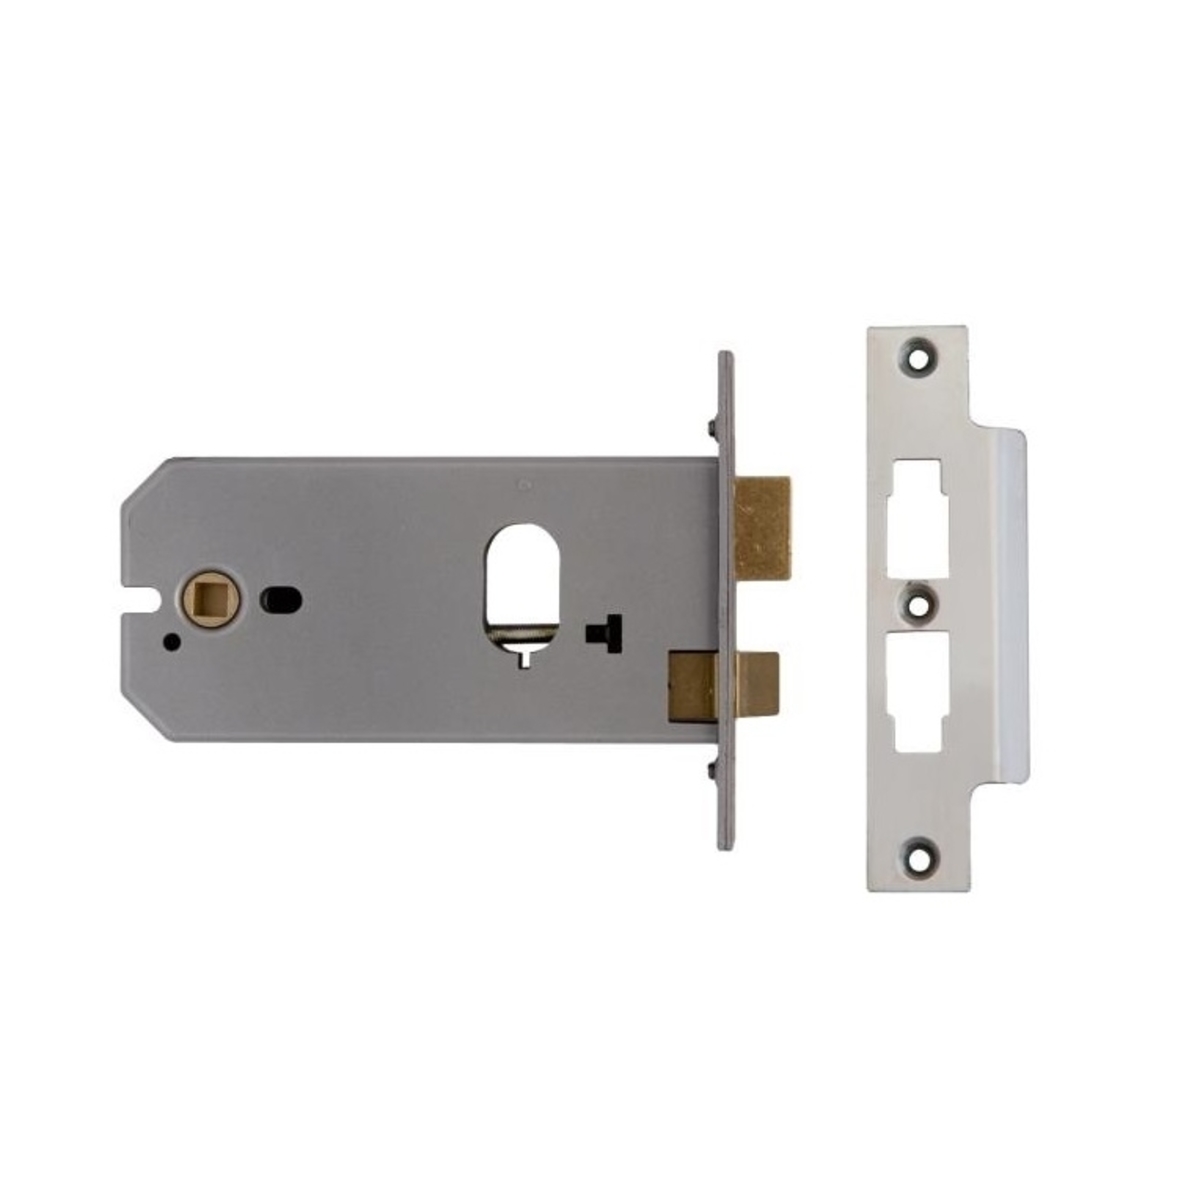 Union 2041/L2041 Oval Profile Horizontal Mortice Lock Suppliers Dealers